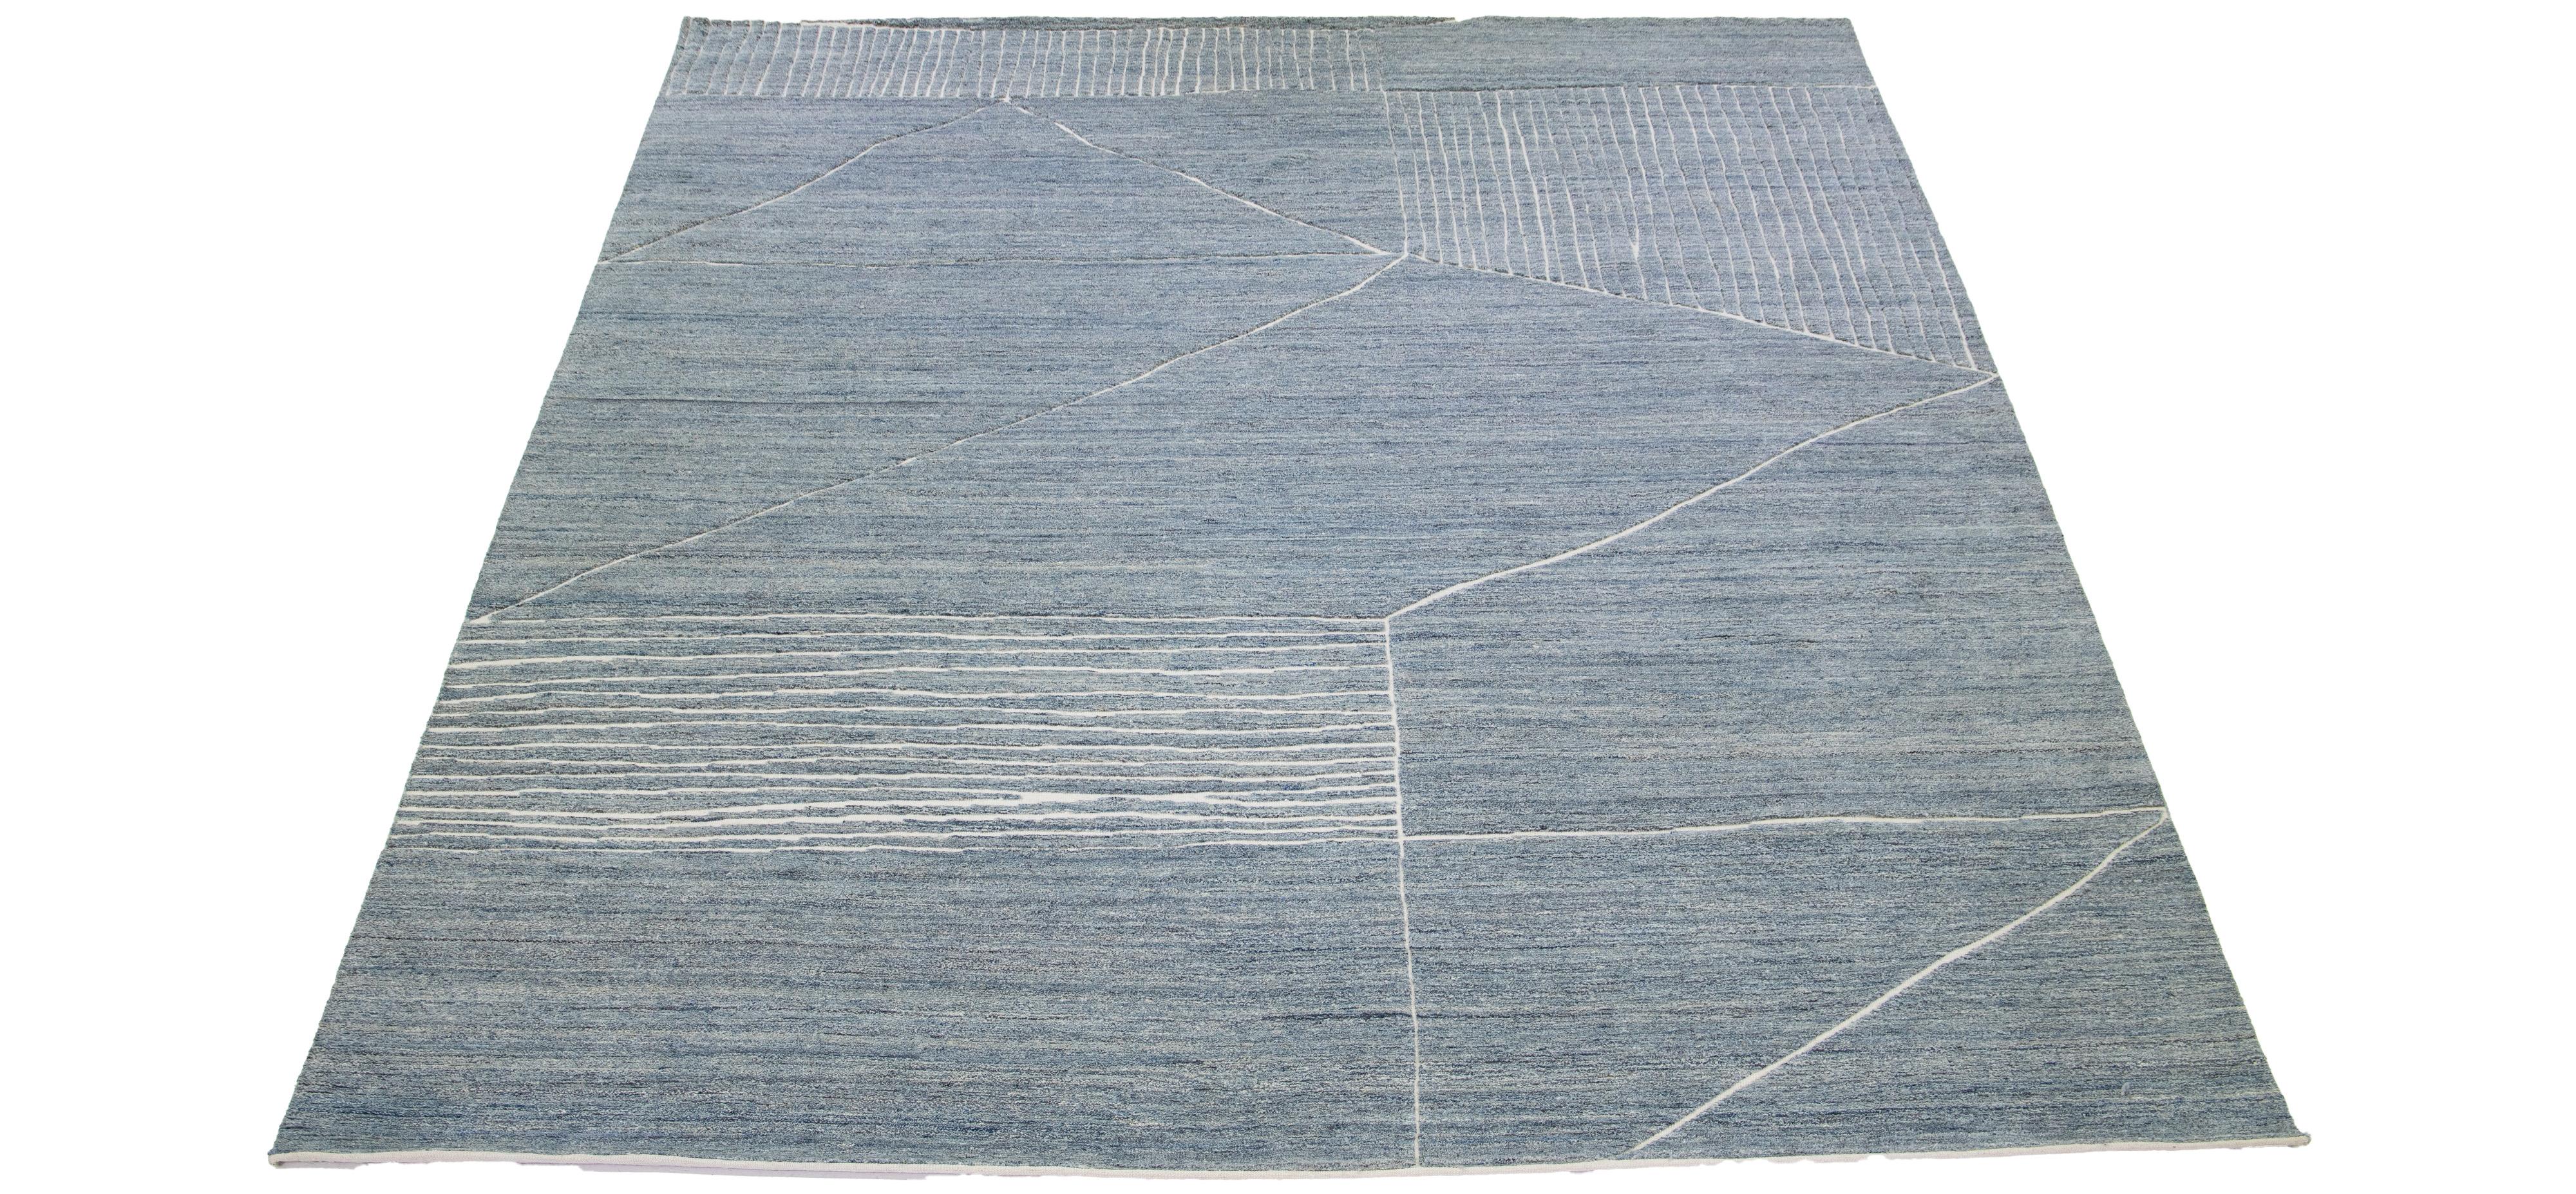 This luxurious wool rug features a timeless Moroccan pattern in a contemporary abstract Minimalist style, utilizing blue tones to create a sleek and modern look. It is crafted using traditional hand-knotting techniques, ensuring exceptional quality